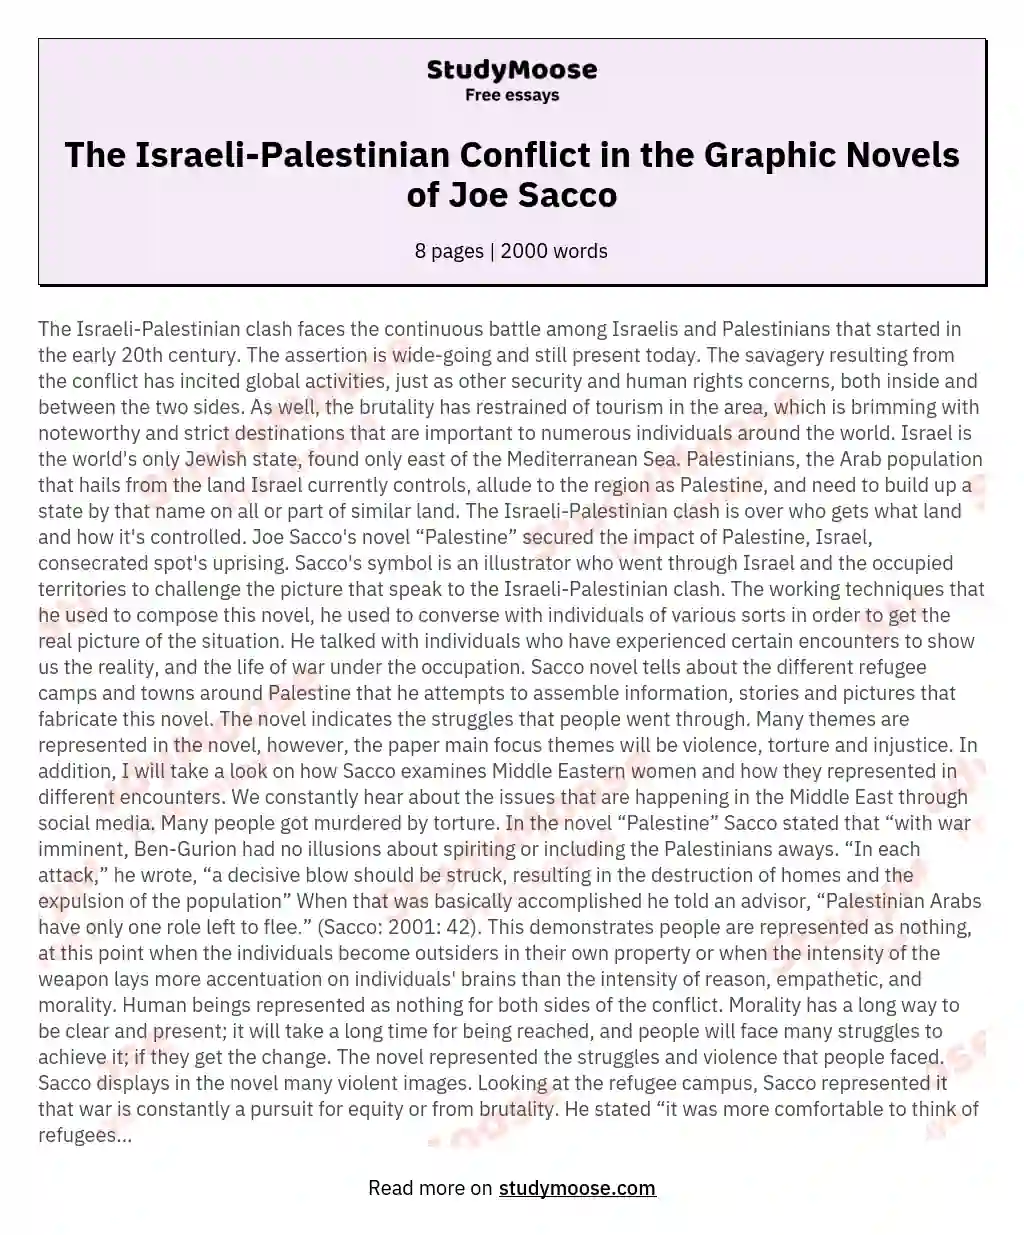 The Israeli-Palestinian Conflict in the Graphic Novels of Joe Sacco essay